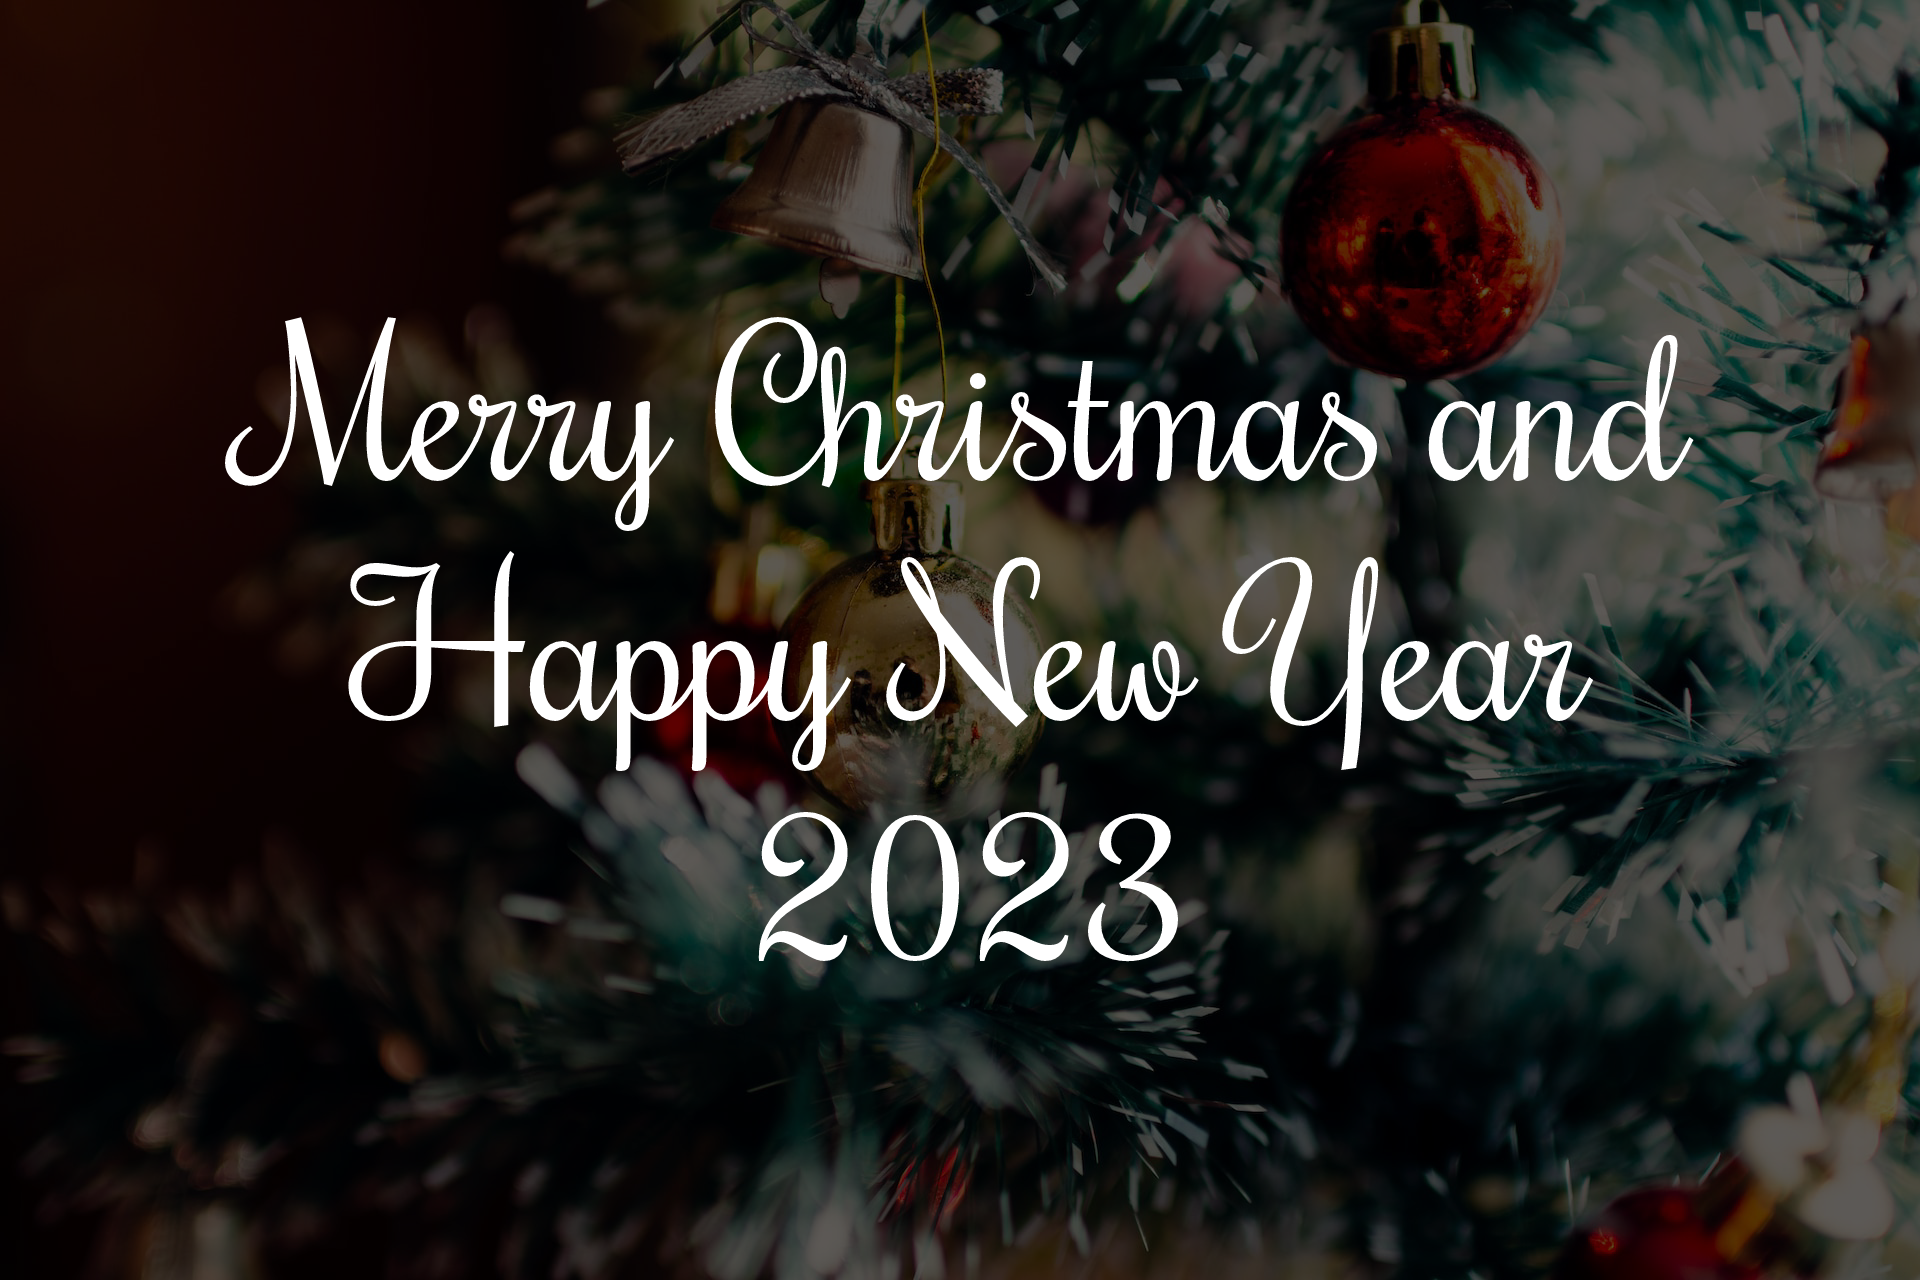 Merry Christmas and Happy New Year 2023 wishes from the Bakklog team